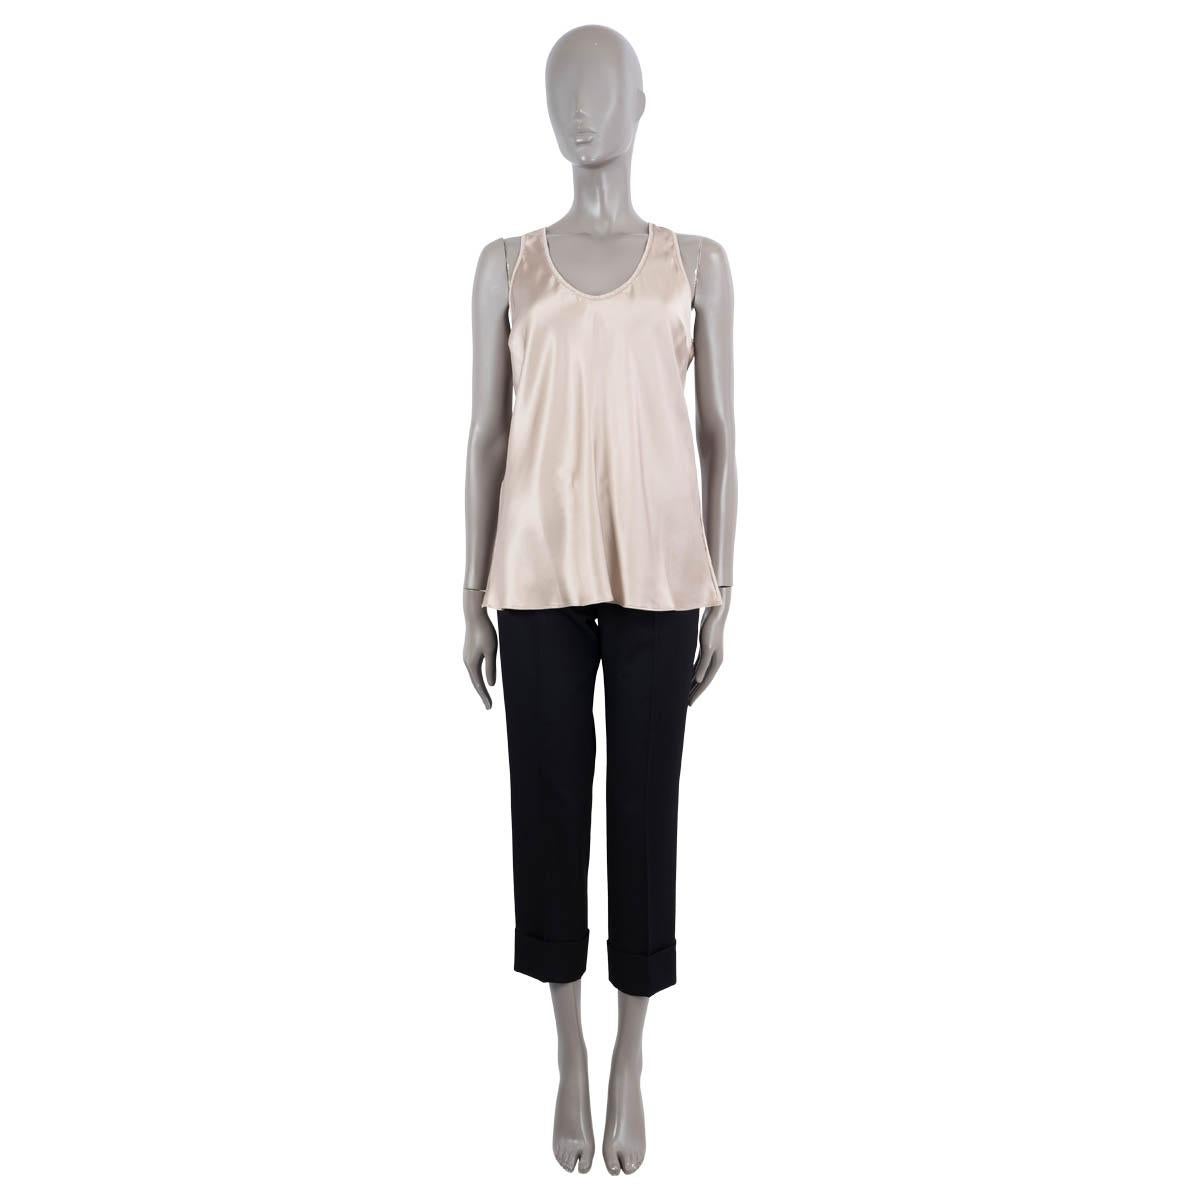 100% authentic Brunello Cucinelli monili trim tank-top in taupe silk satin (100%). Features a loose fit silhouette and are rib-knit trim in cotton (94%) and lycra (4%) along the scoop neckline. Unlined. Has been worn and is in excellent